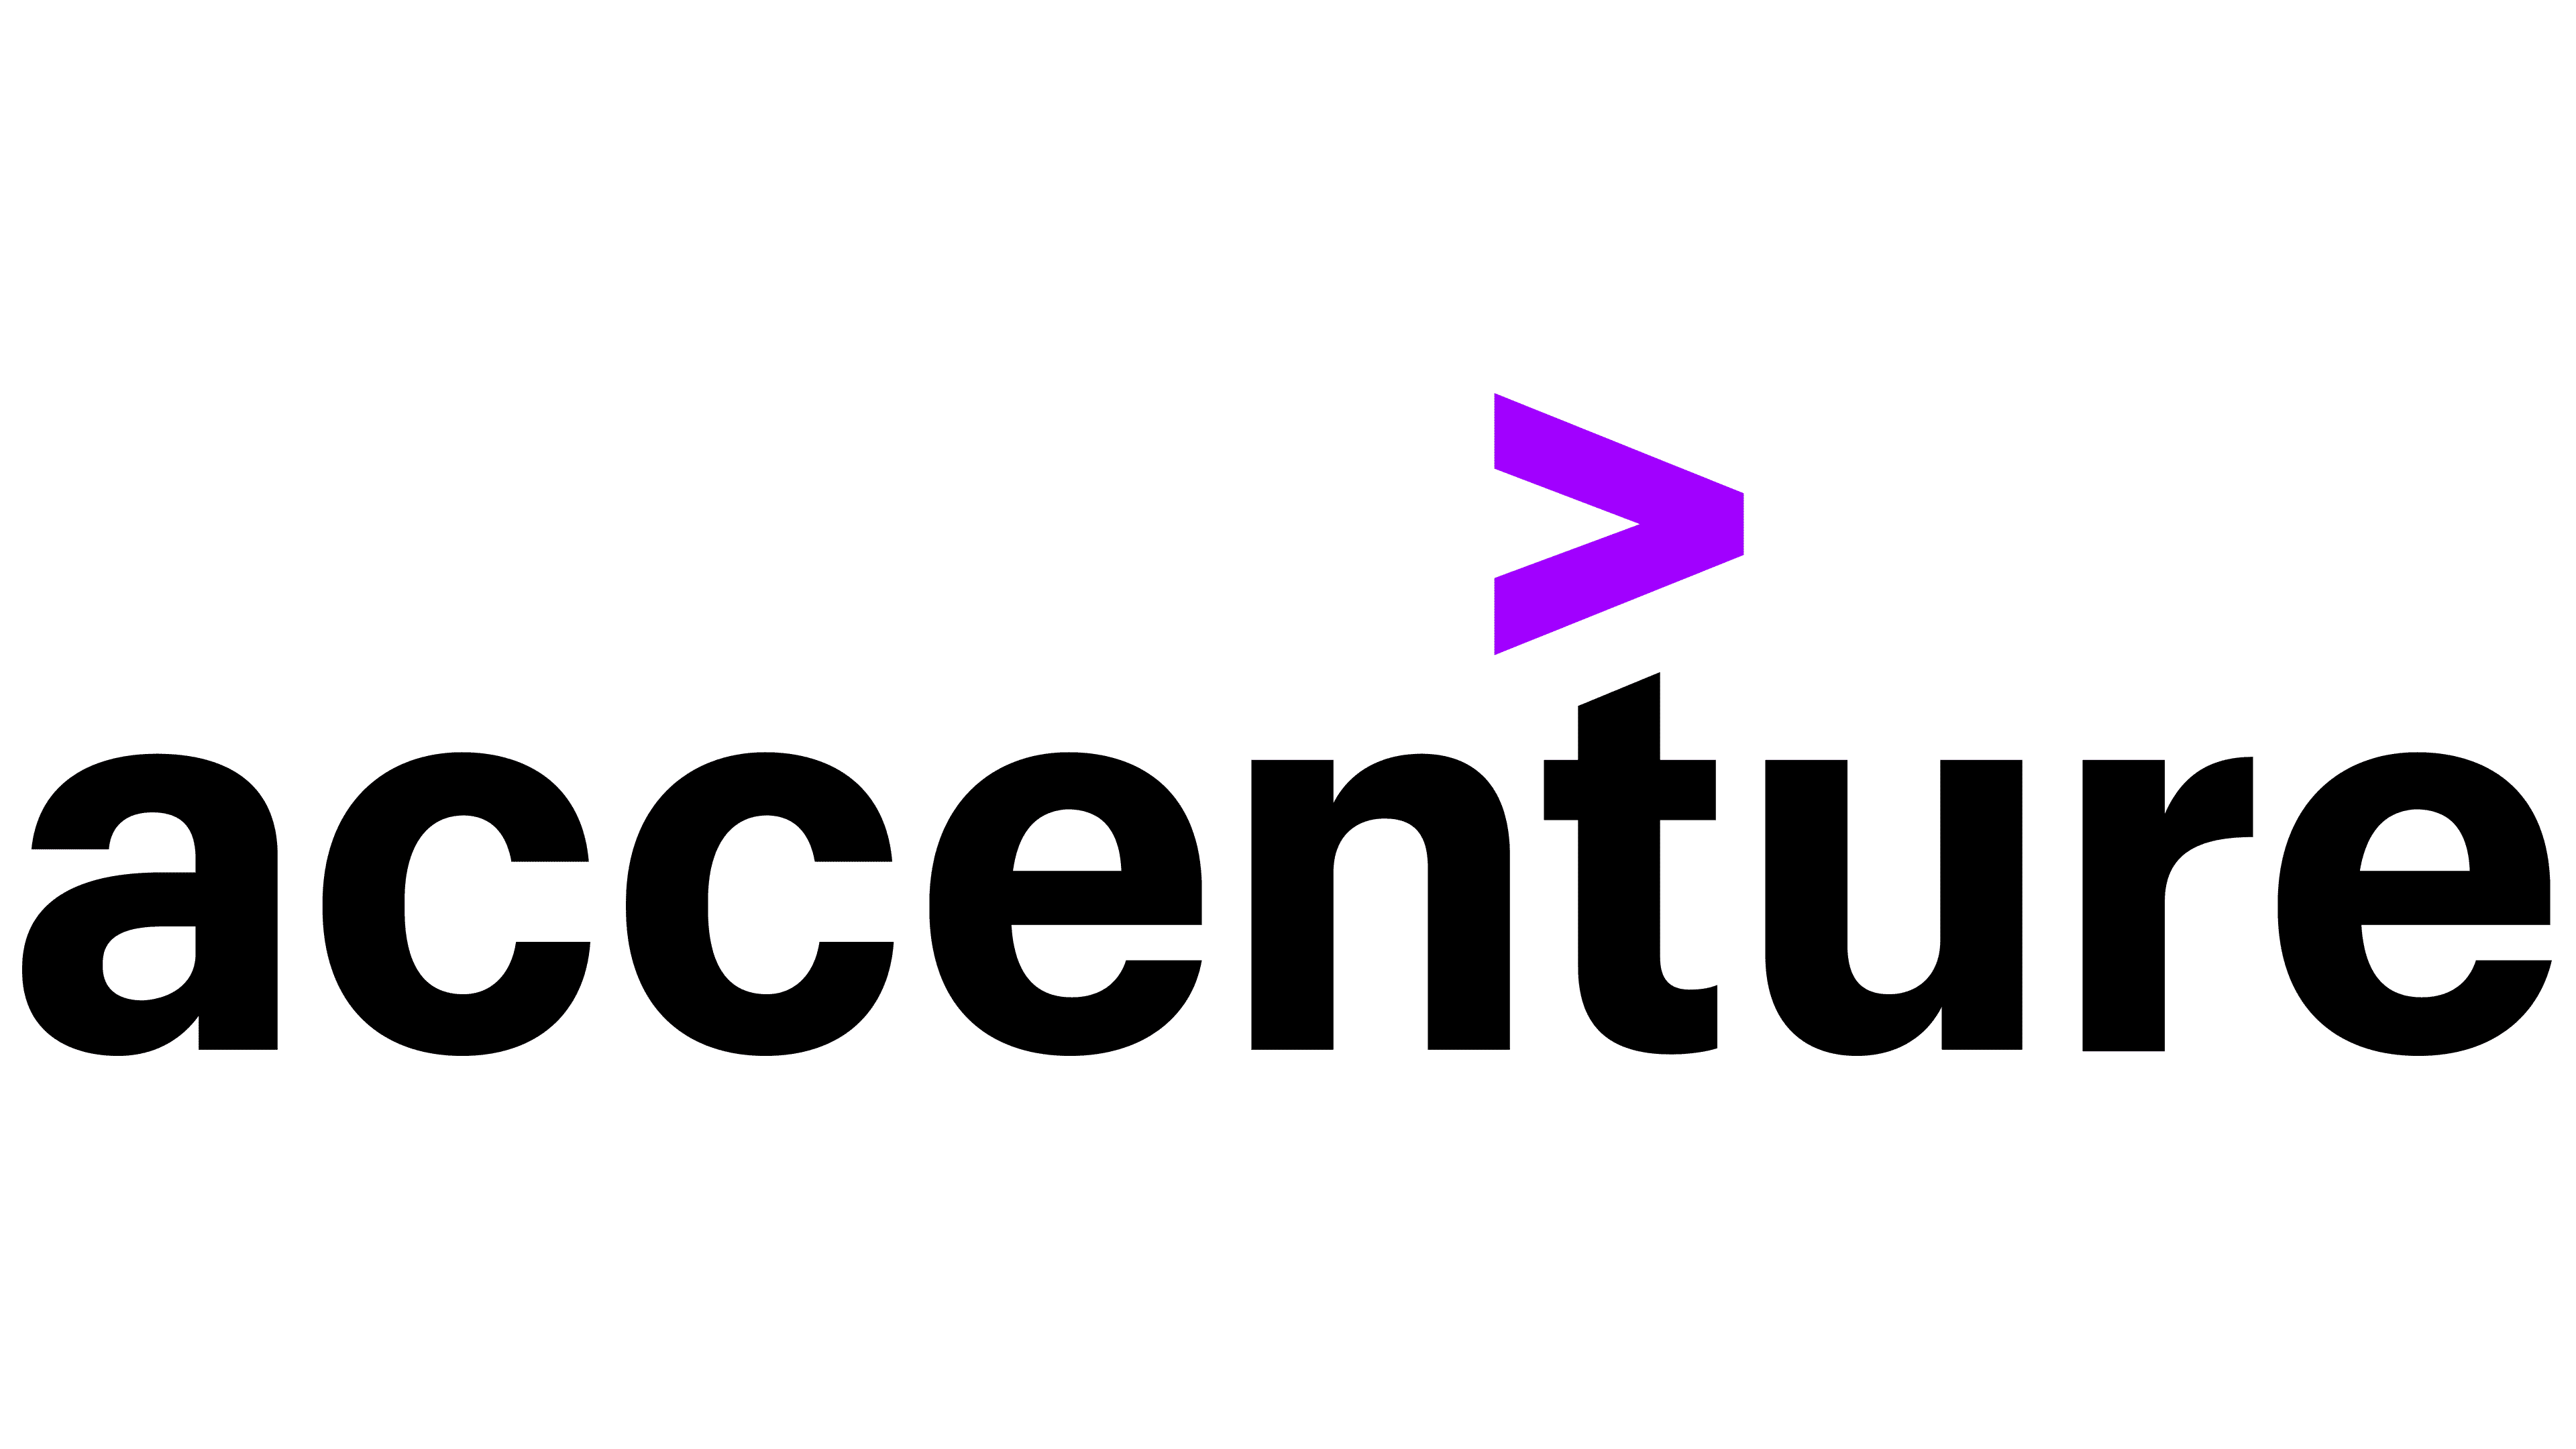 What is accenture amerigroup comorbid medical conditions for bariatric surgery